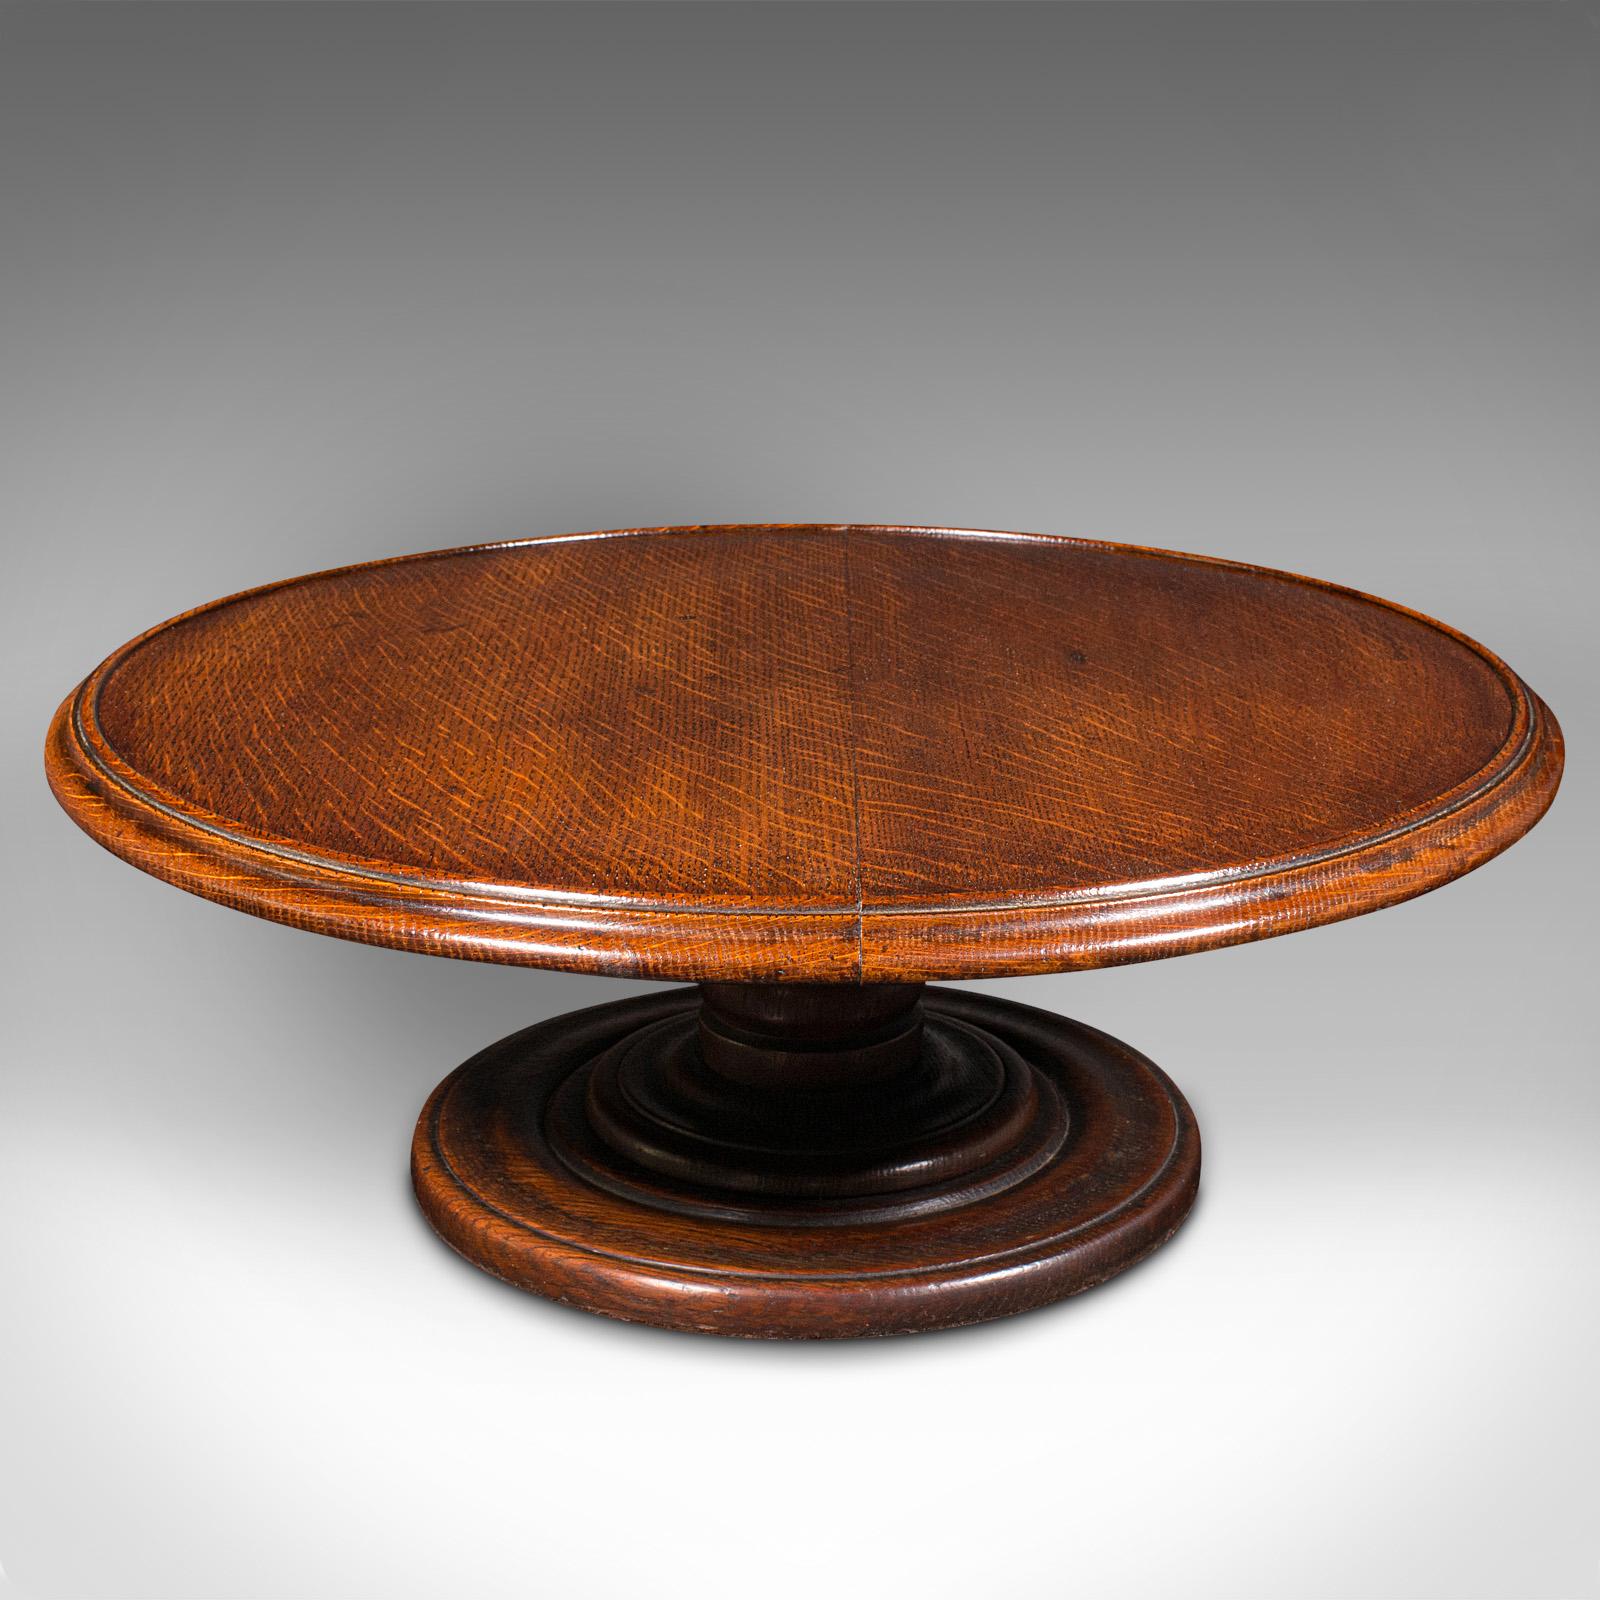 This is an antique Lazy Susan. An English, oak rotary display turntable, dating to the Regency period, circa 1830.

Superb figuring accentuates this generously wide Lazy Susan
Displays a desirable aged patina and in good order
Select oak stocks